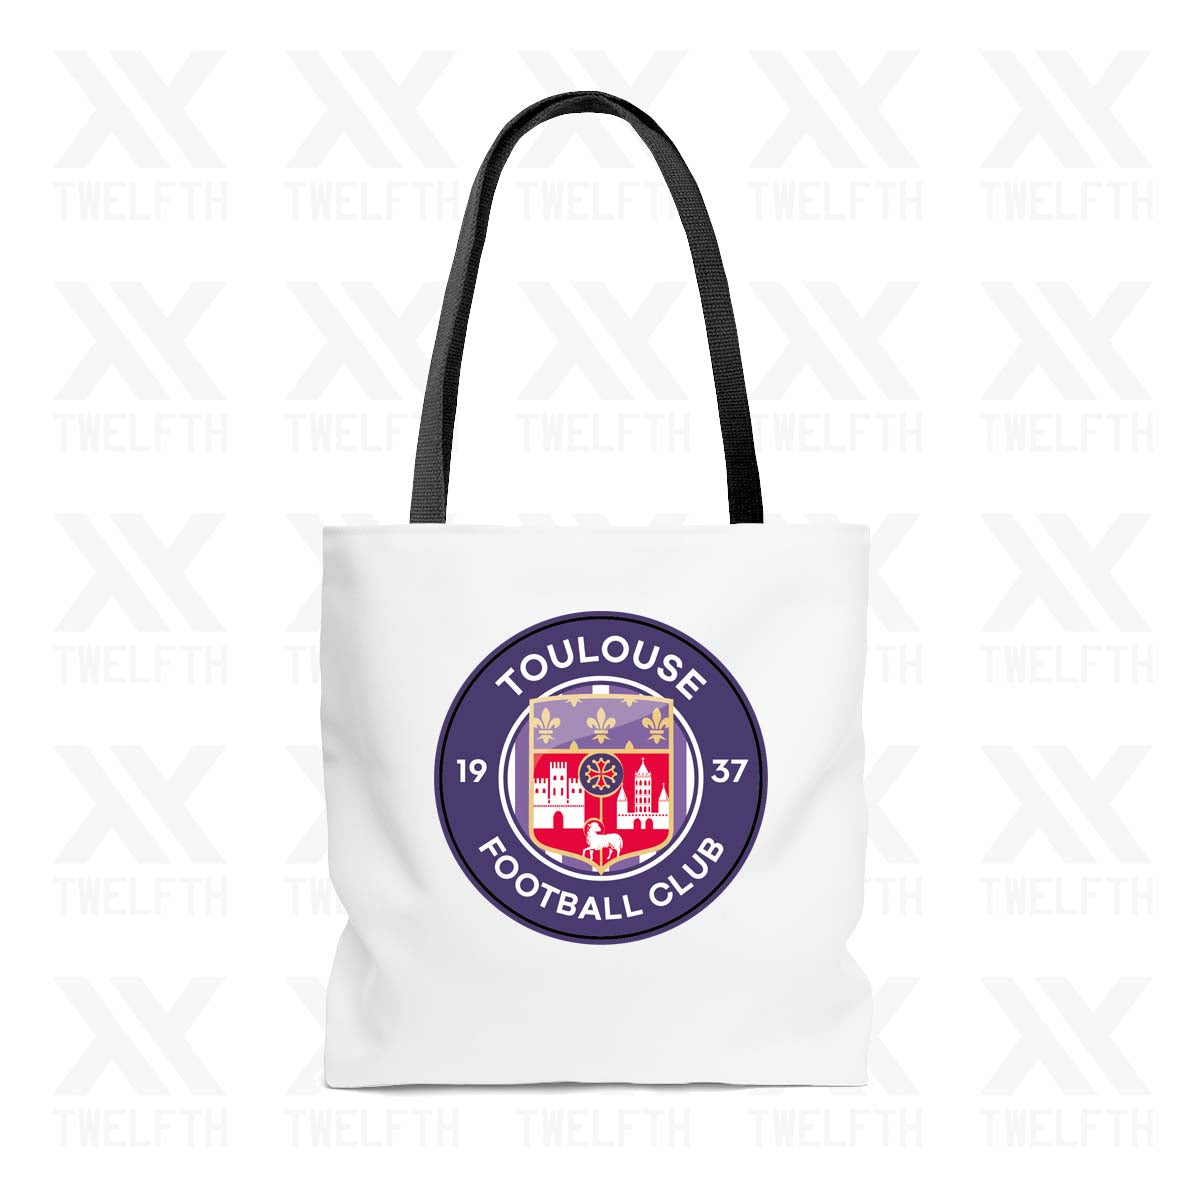 Toulouse Crest Tote Bag